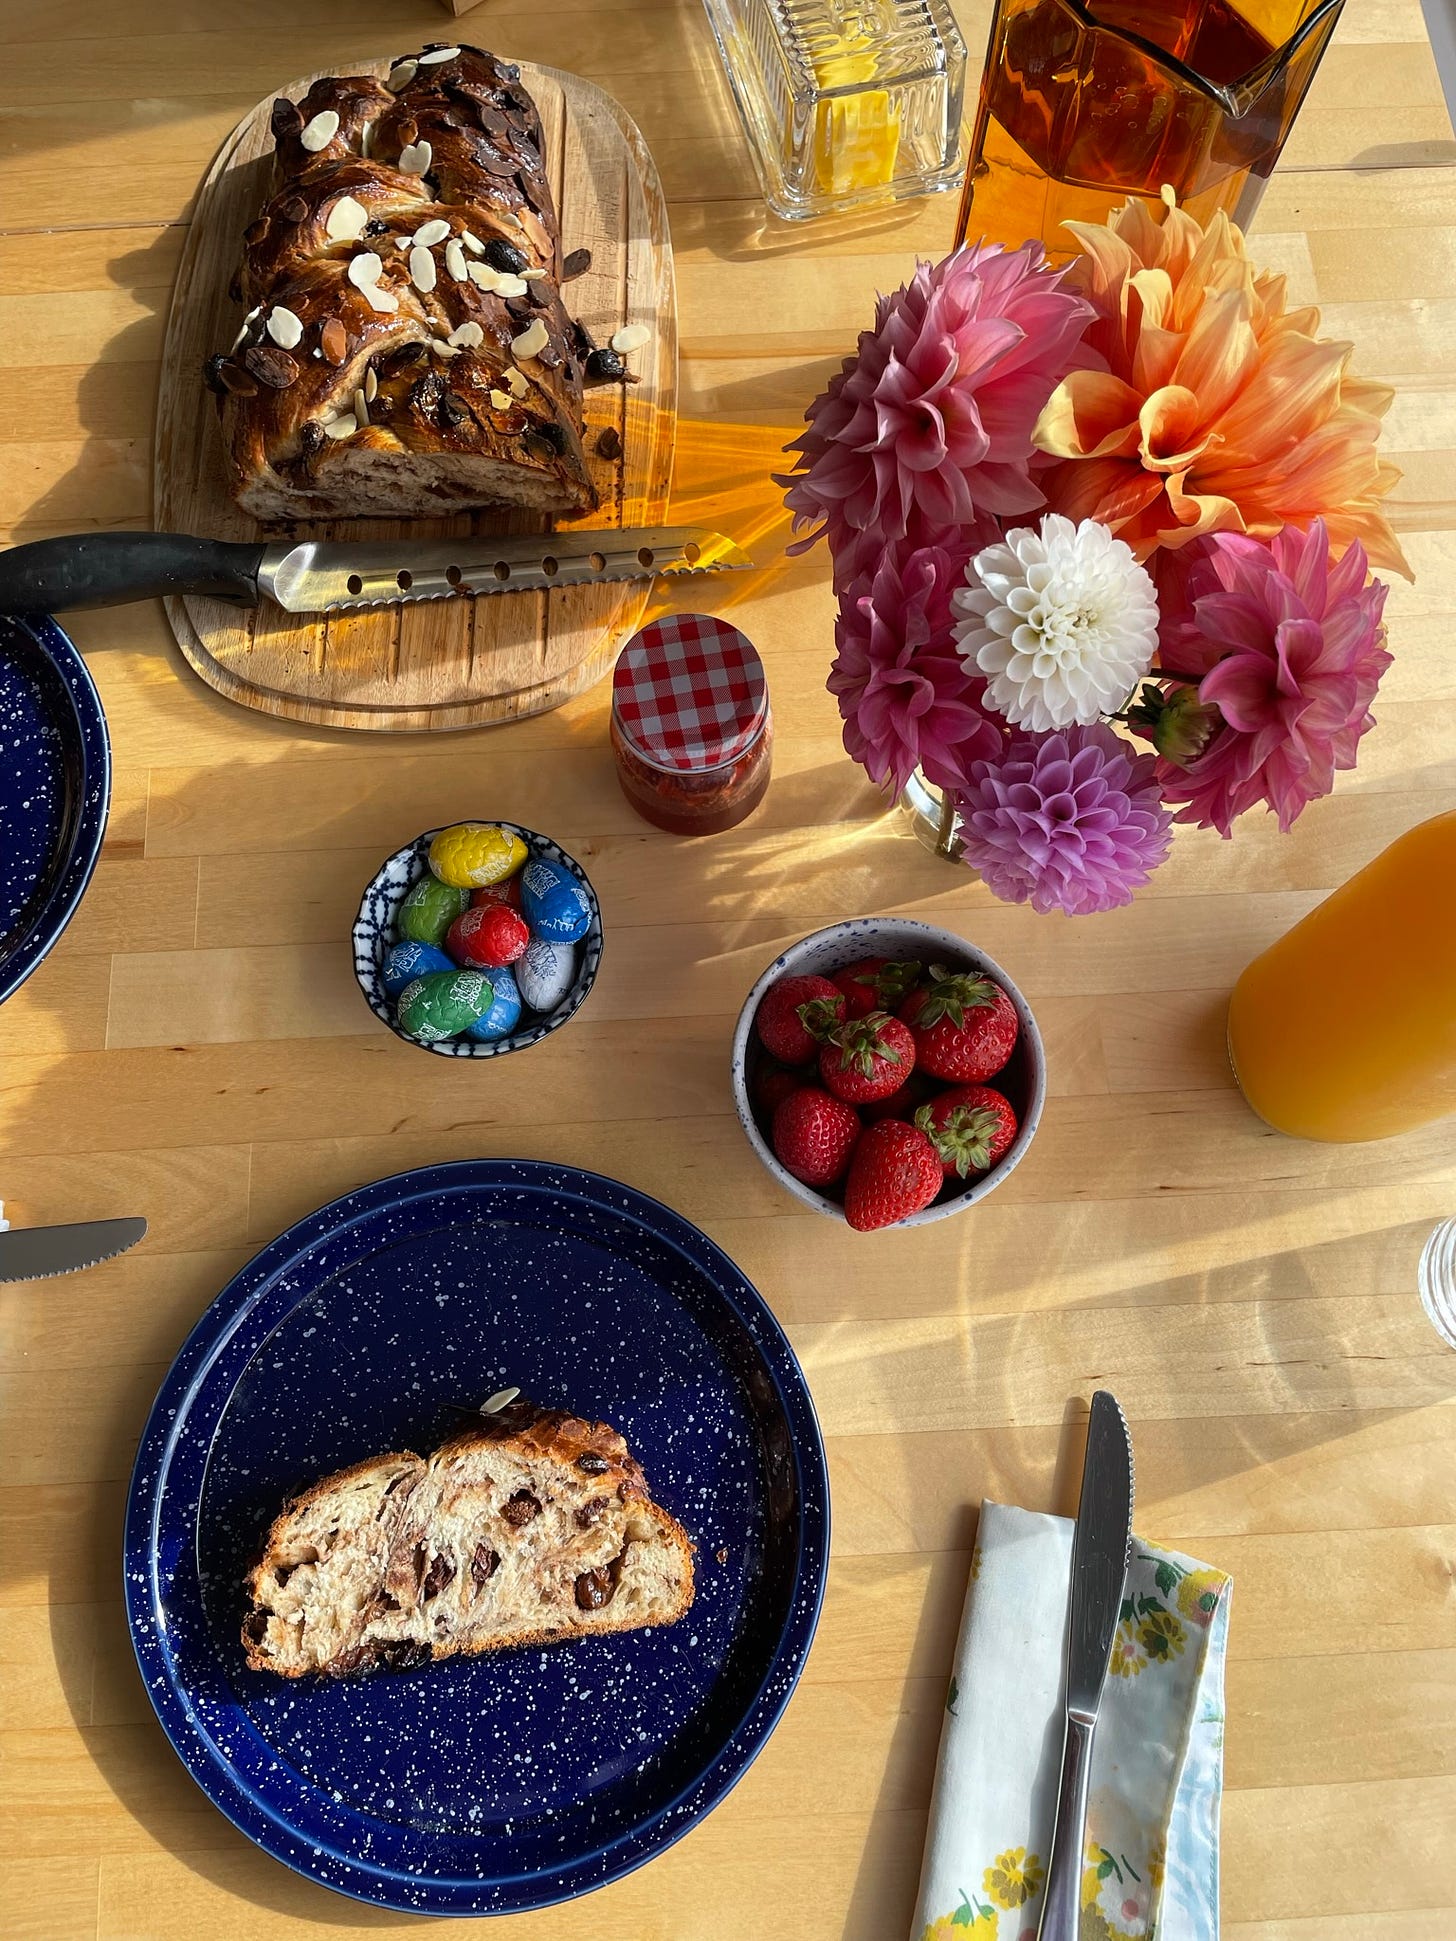 Table setting in morning sun with a braided fruit loaf, small vase of pink, orange and white dahlias, easter eggs and strawberries